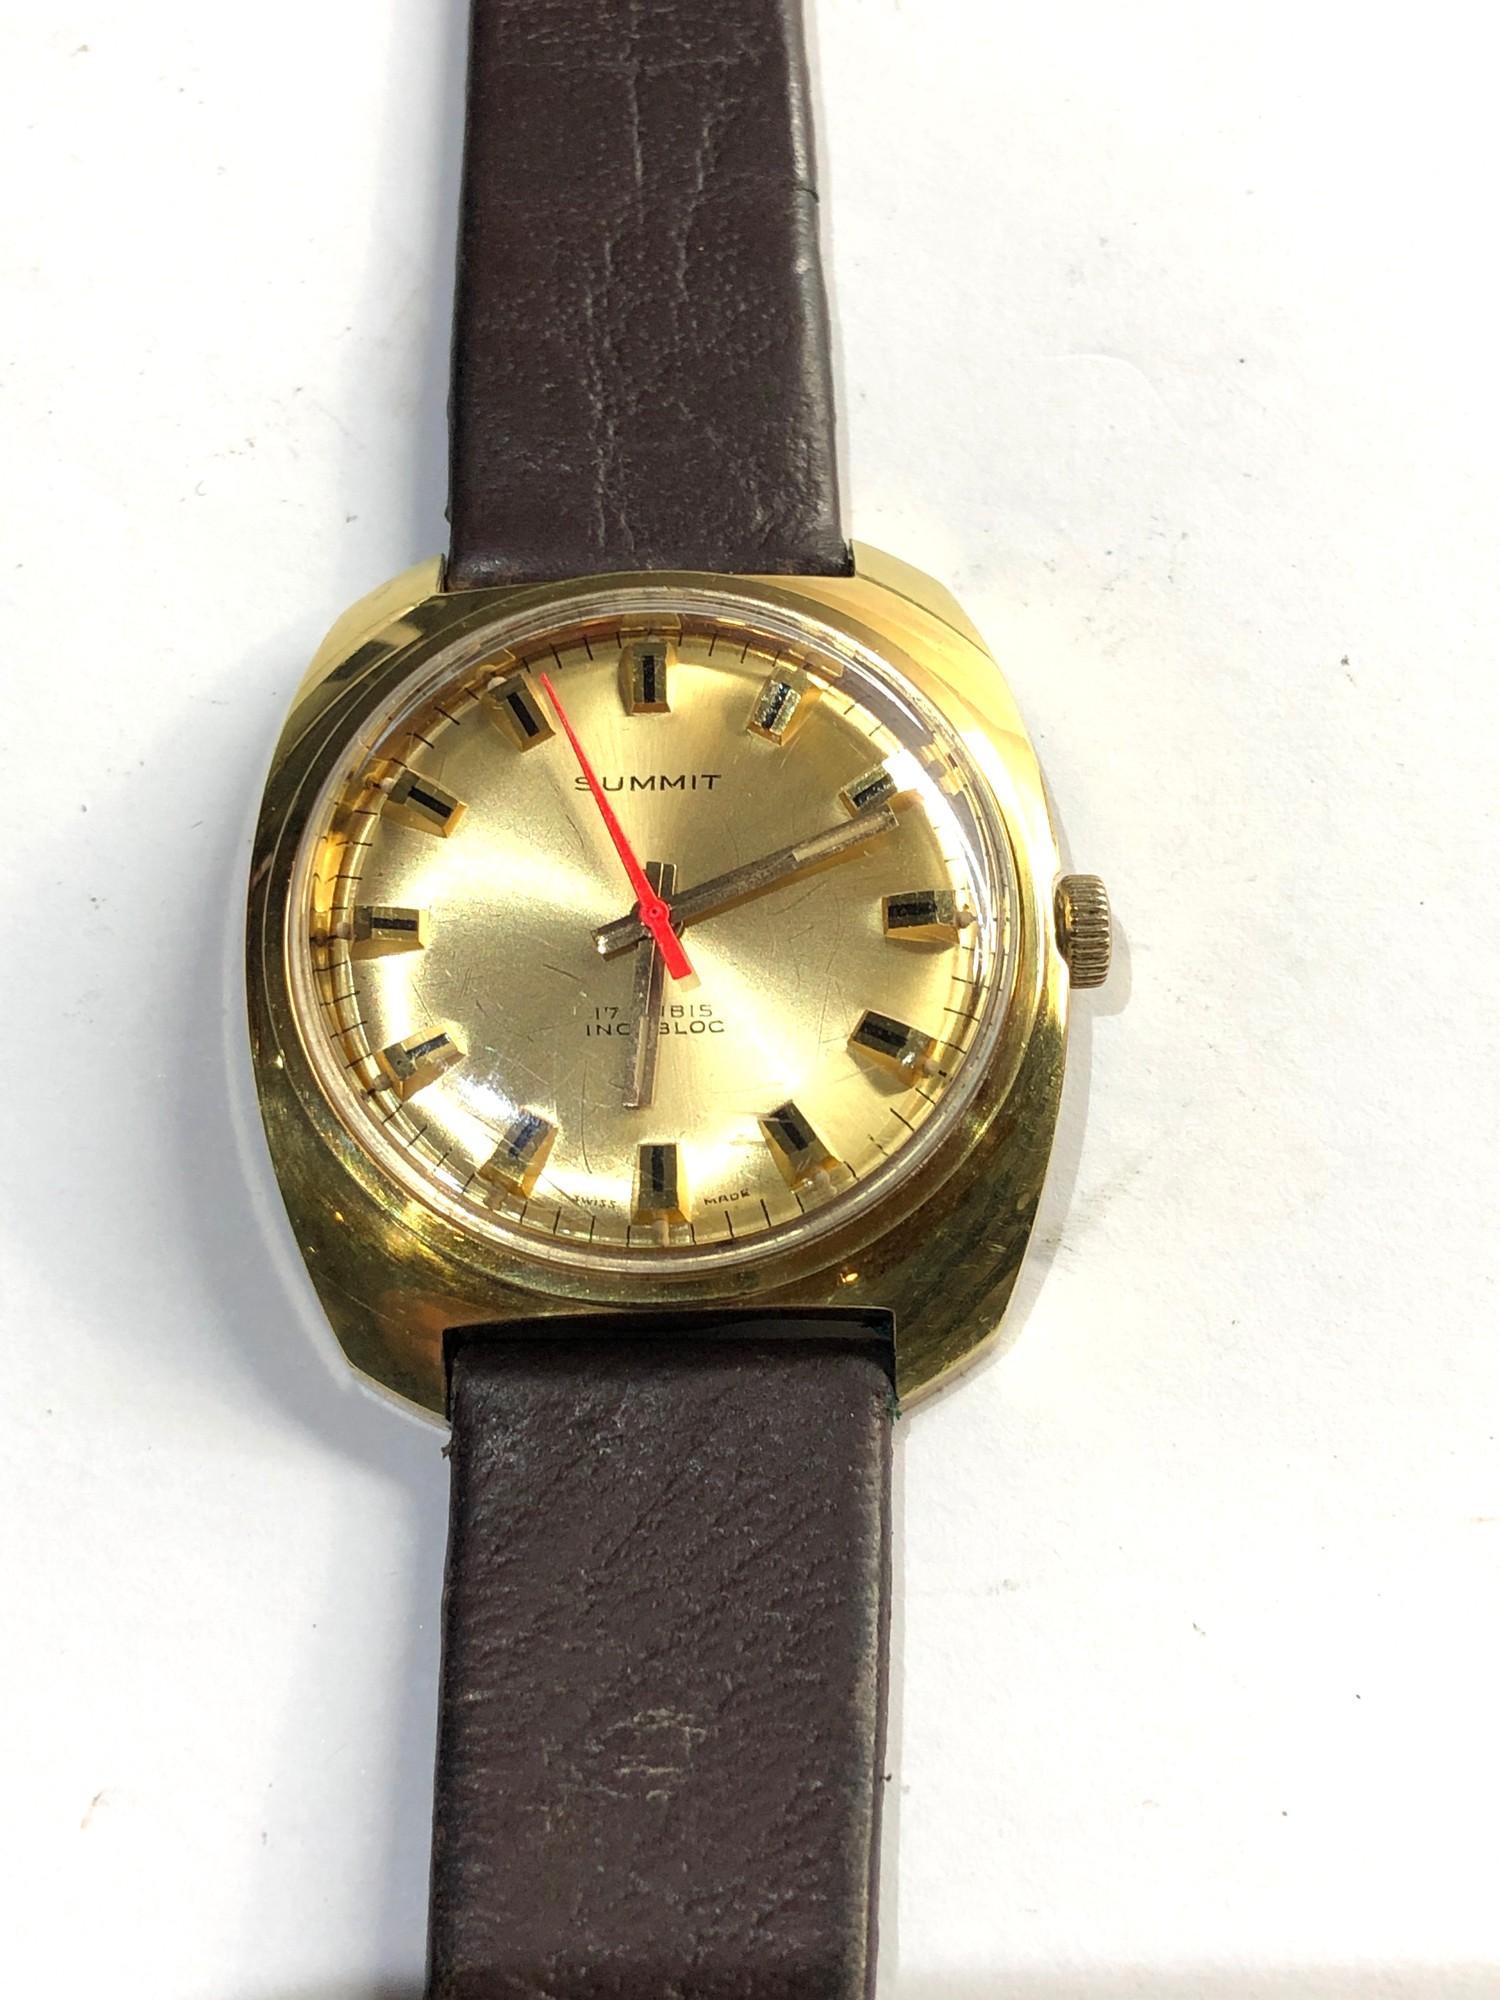 Vintage Gents Gold Plated Summit 17 jewel red second hand wristwatch winds and ticks good overall